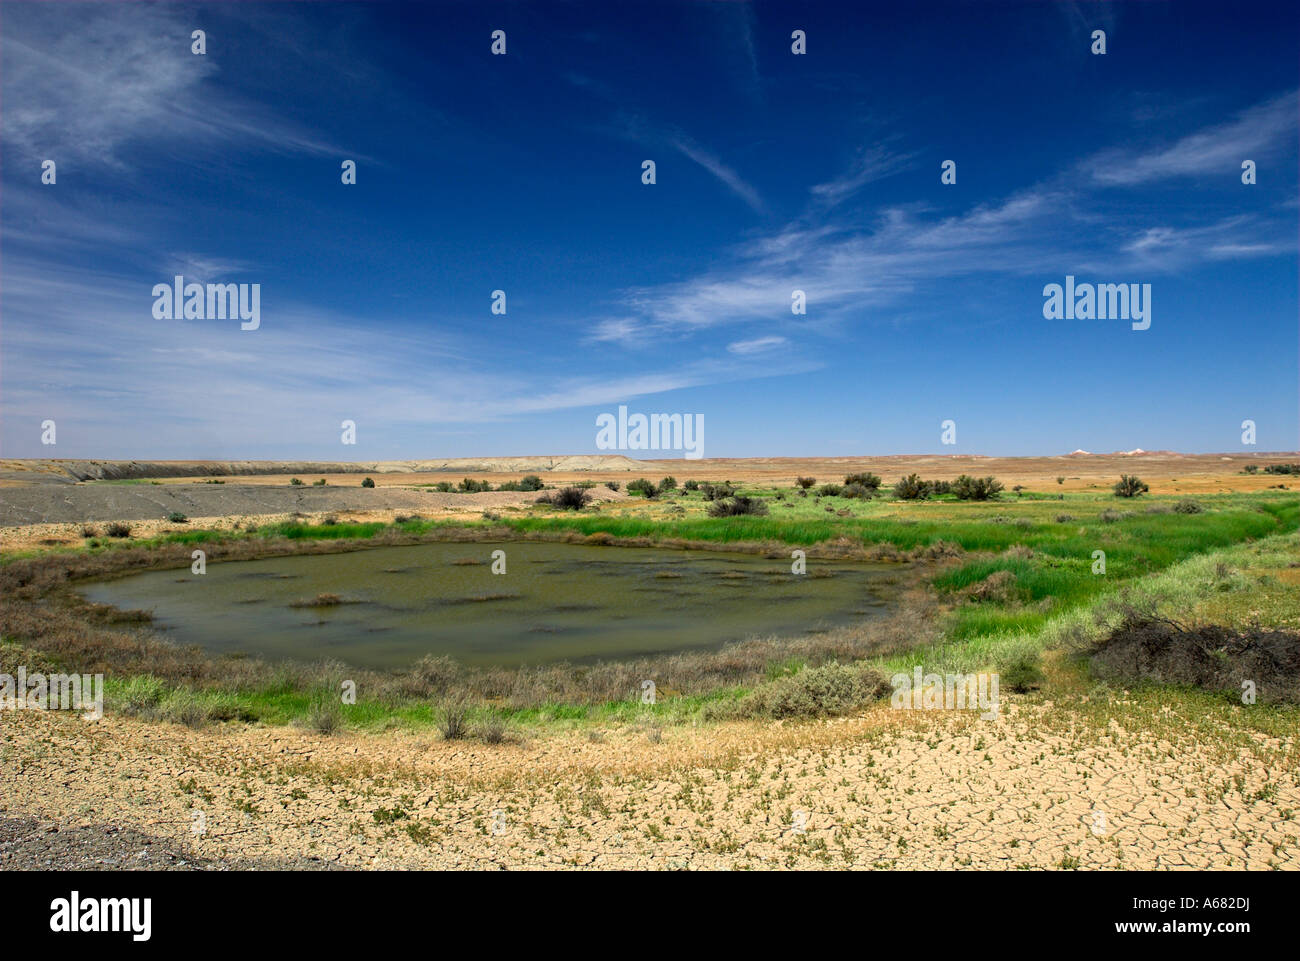 Water hole in the outback near Coober Pedy, South Australia, Australia Stock Photo